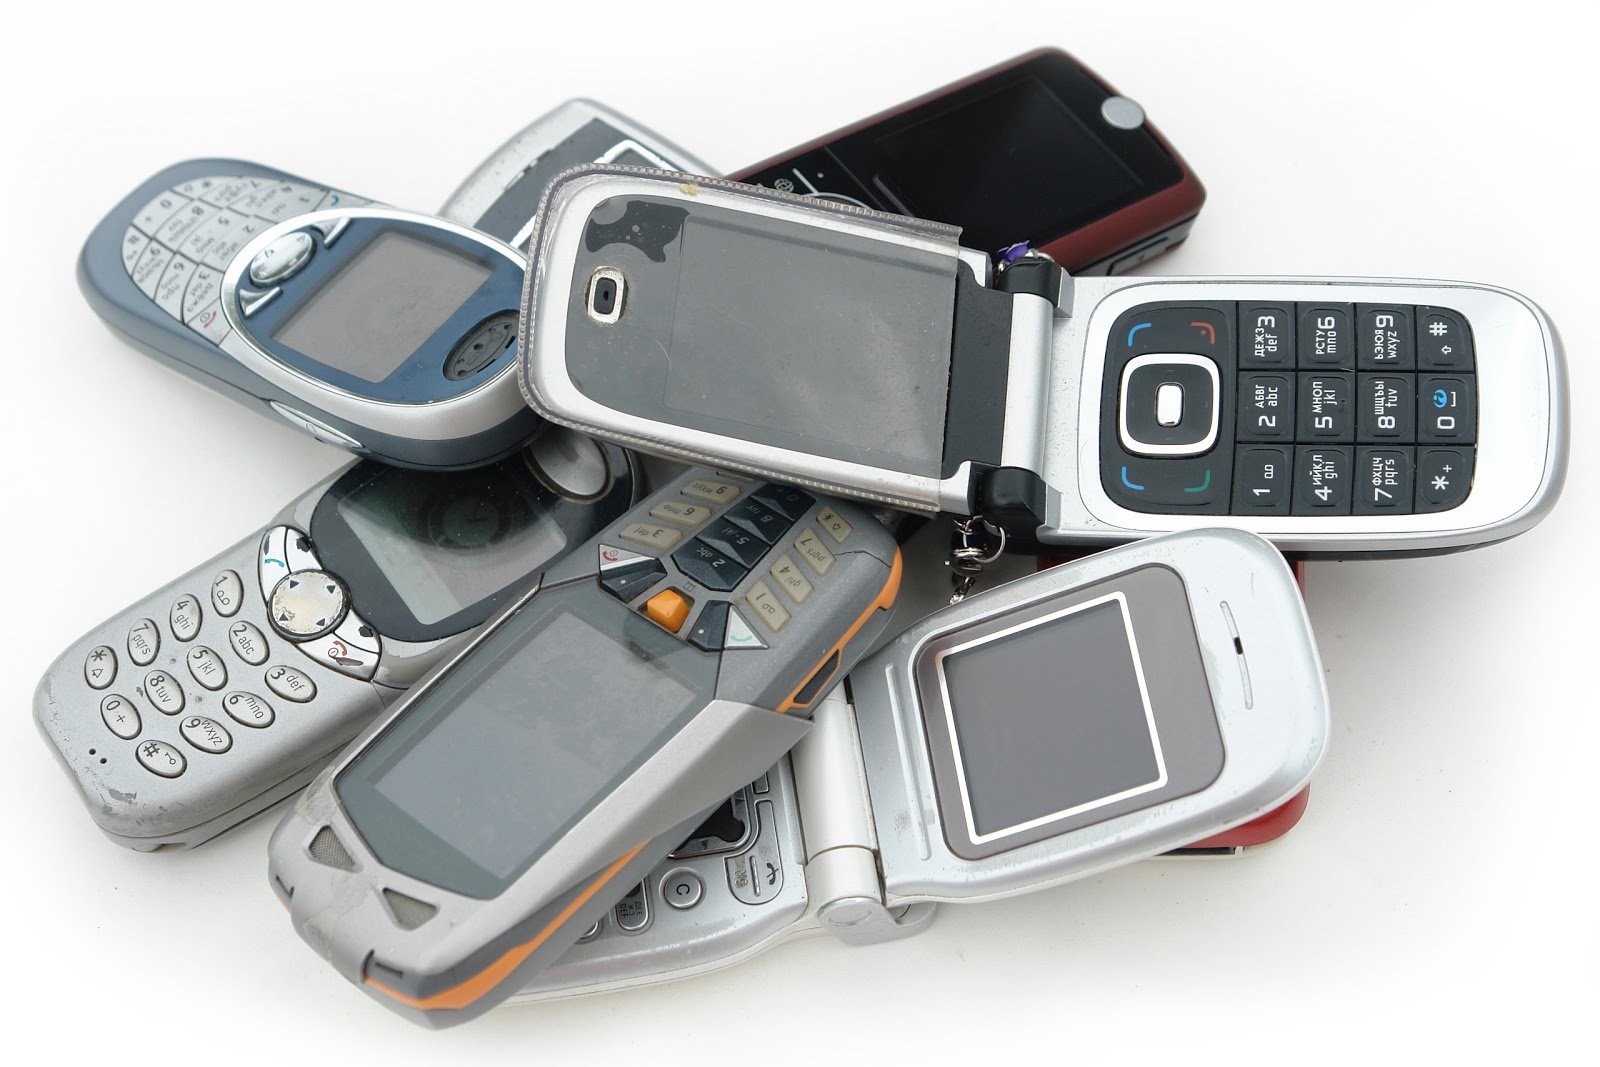 Laker Energy Matters: Calling all old cell phones!